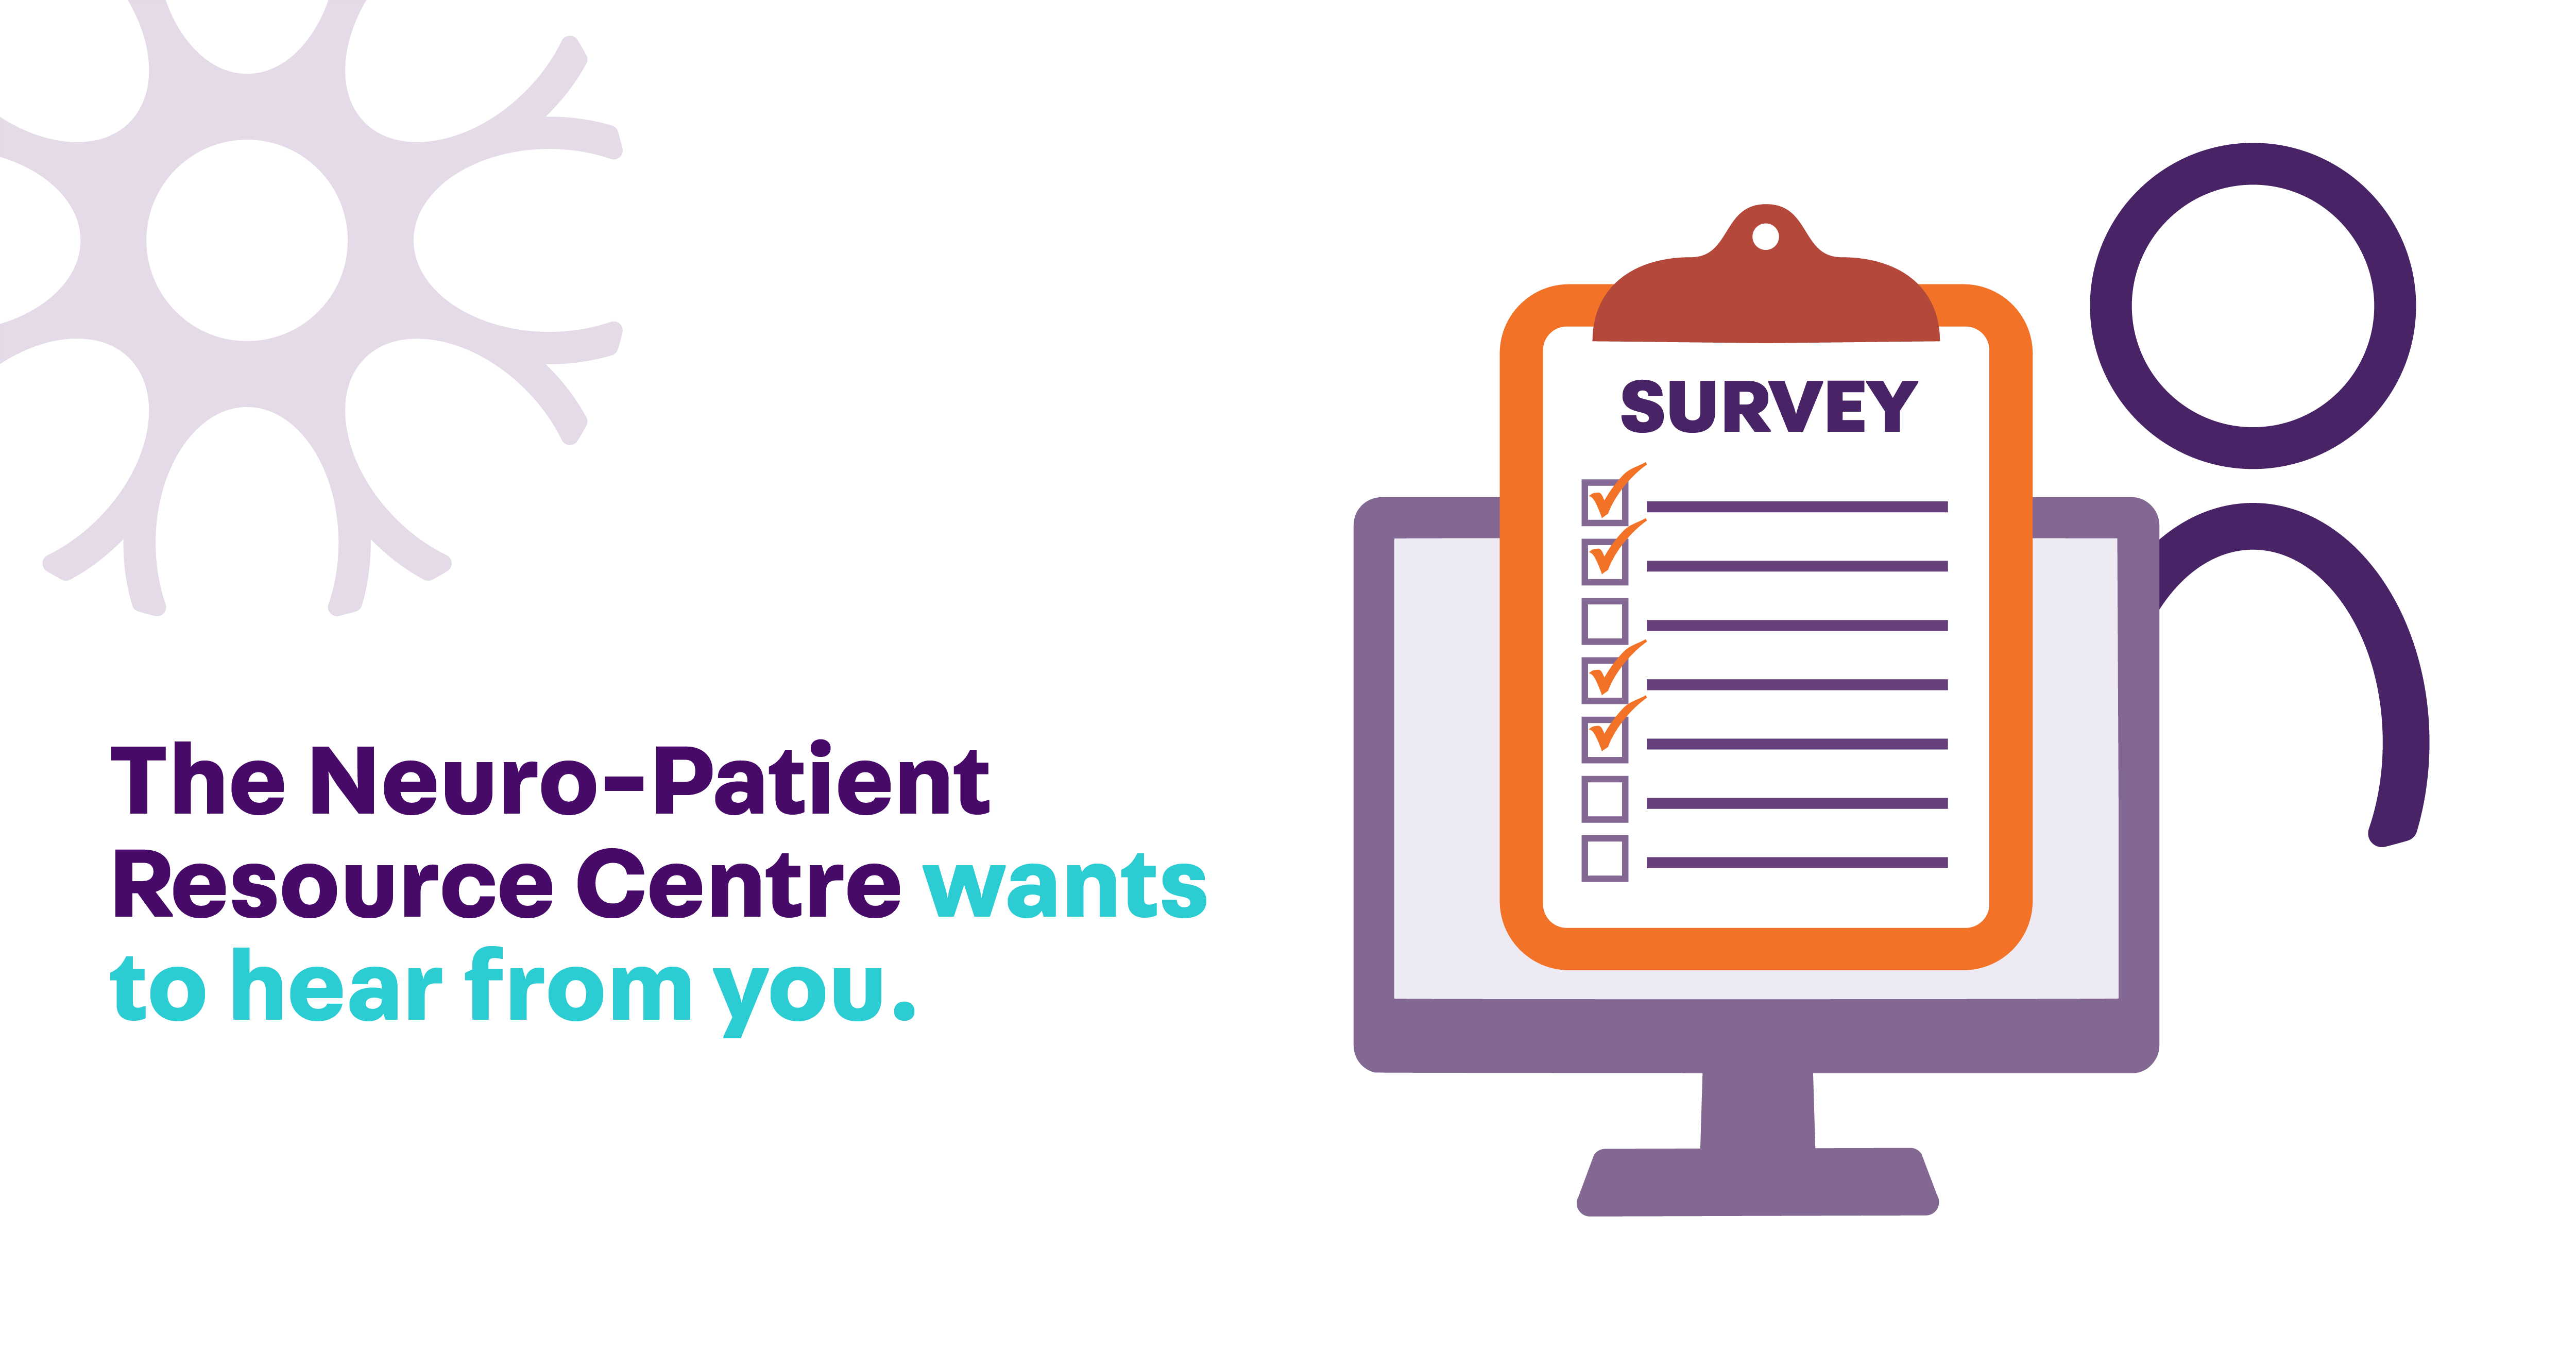 The Neuro-Patient Resource Centre wants to hear from you